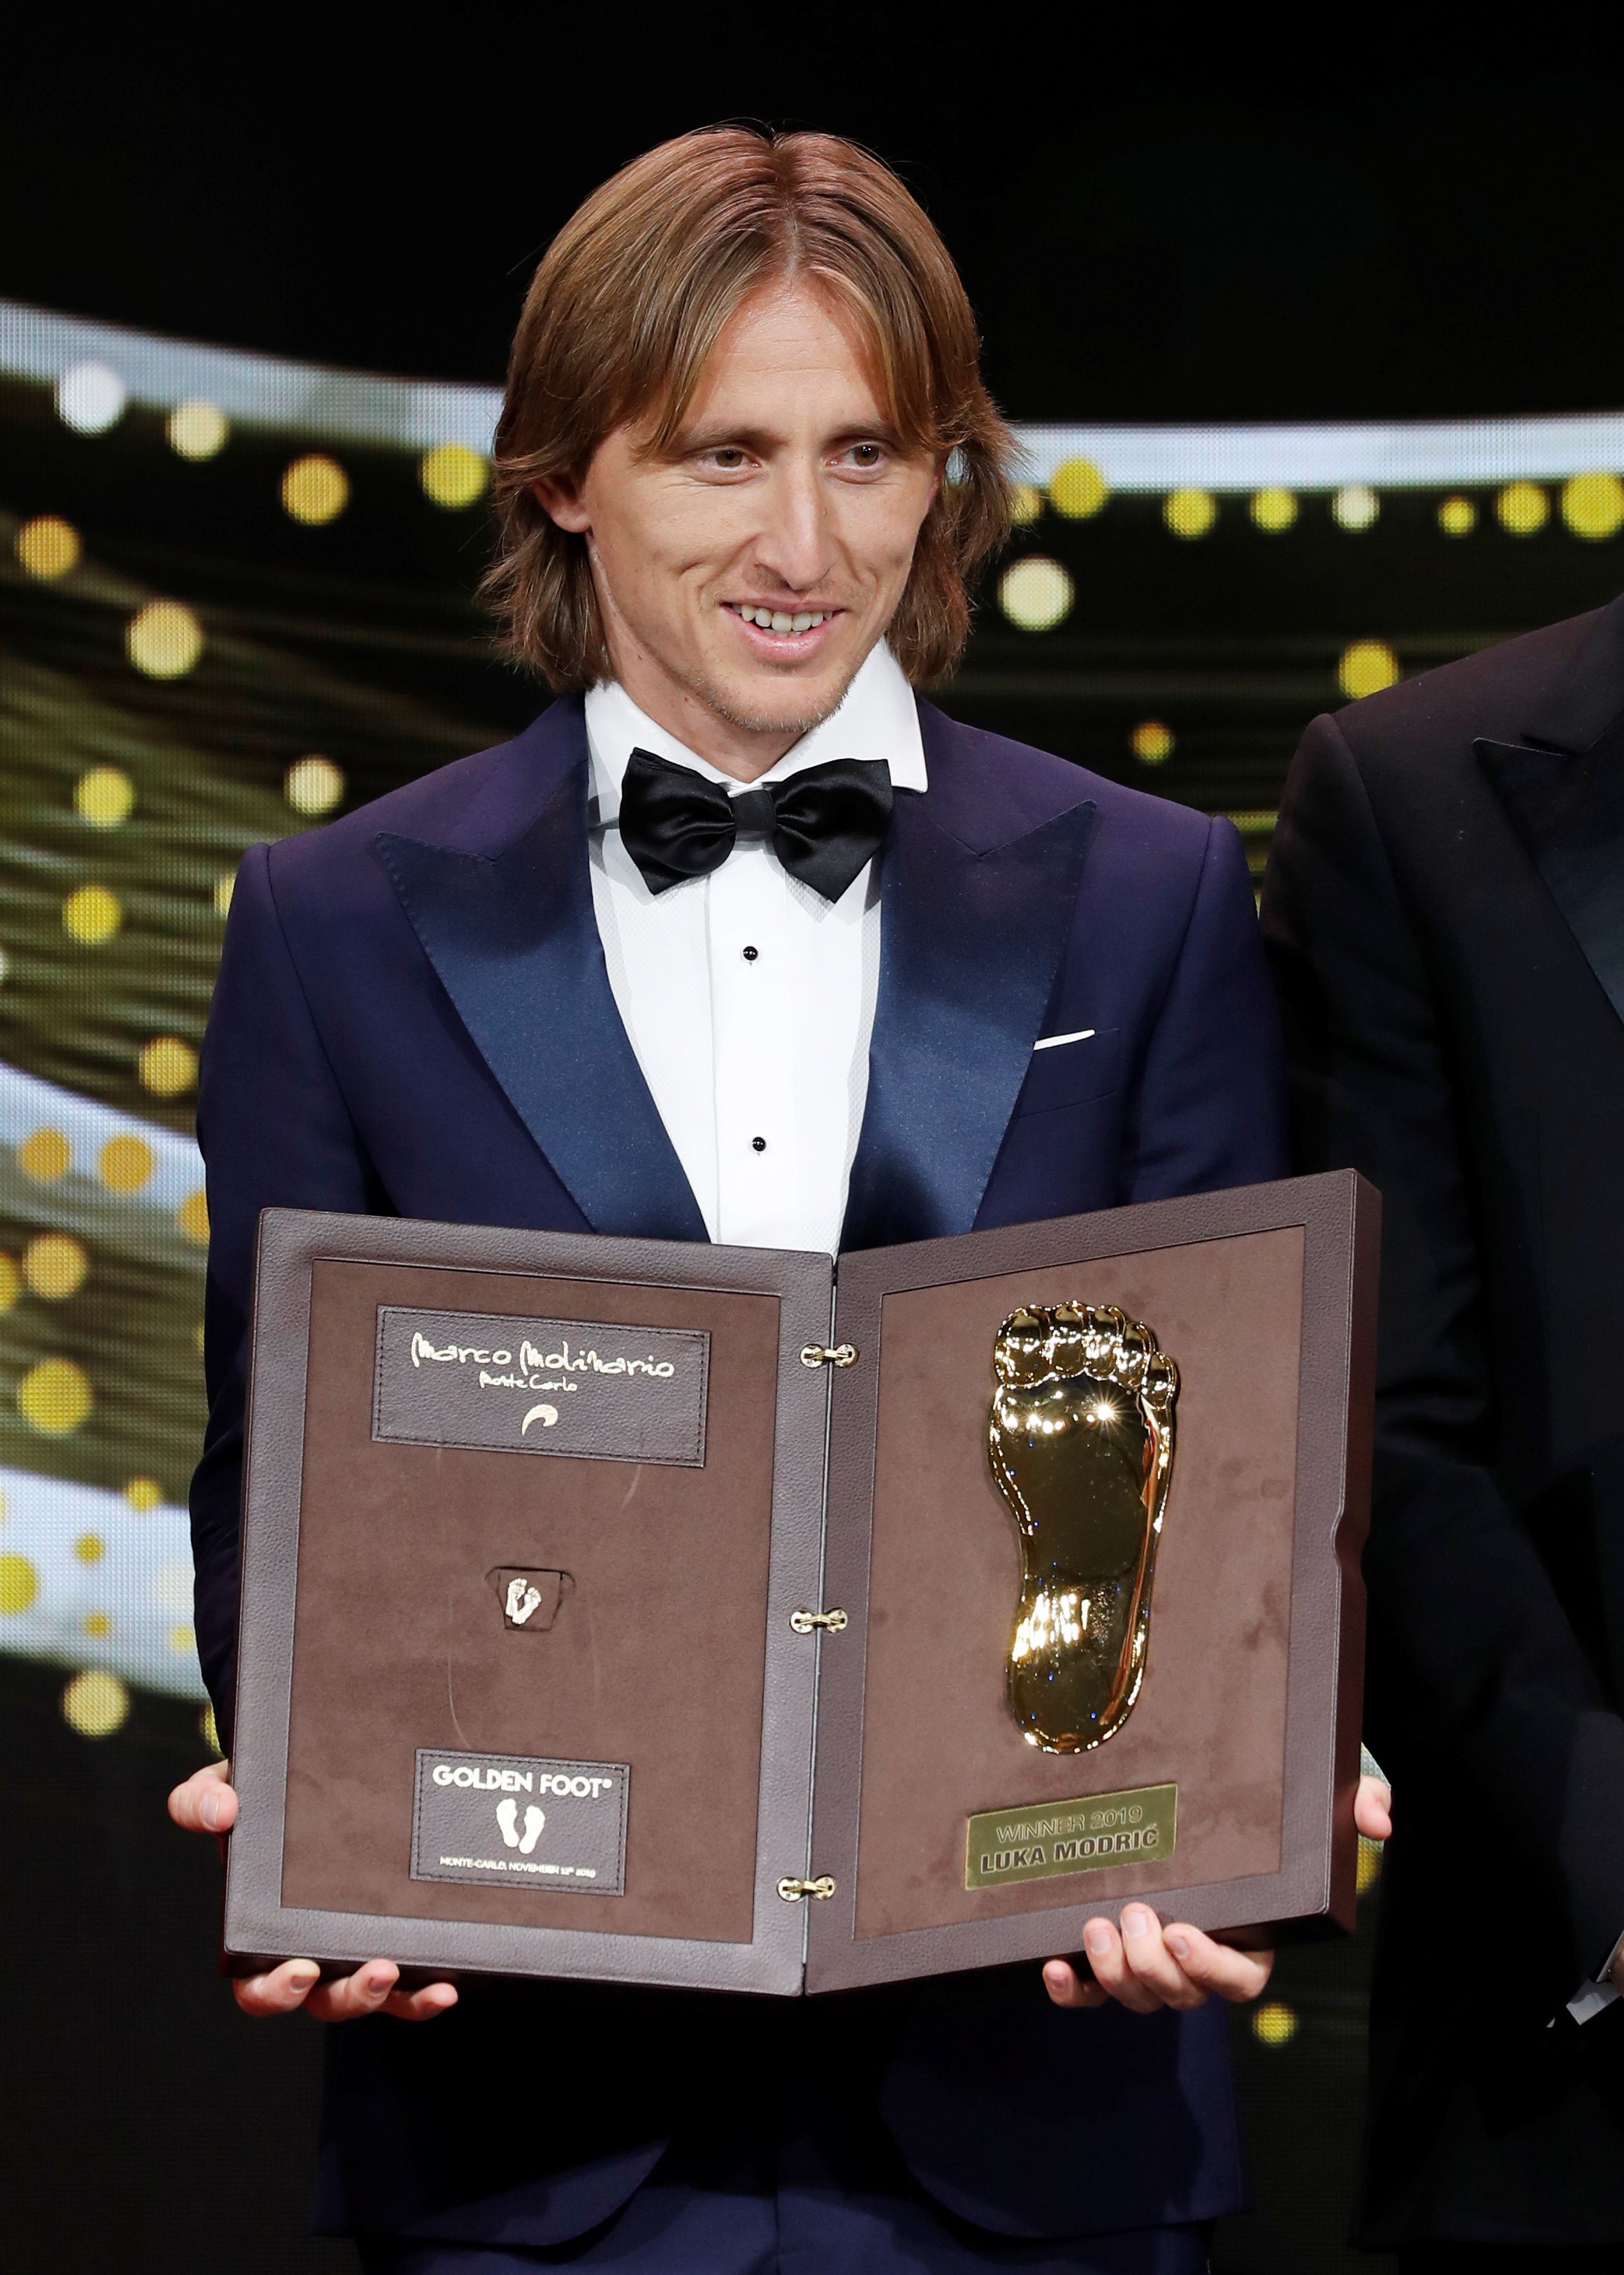 Luka Modric with the 2022 Golden Foot Award